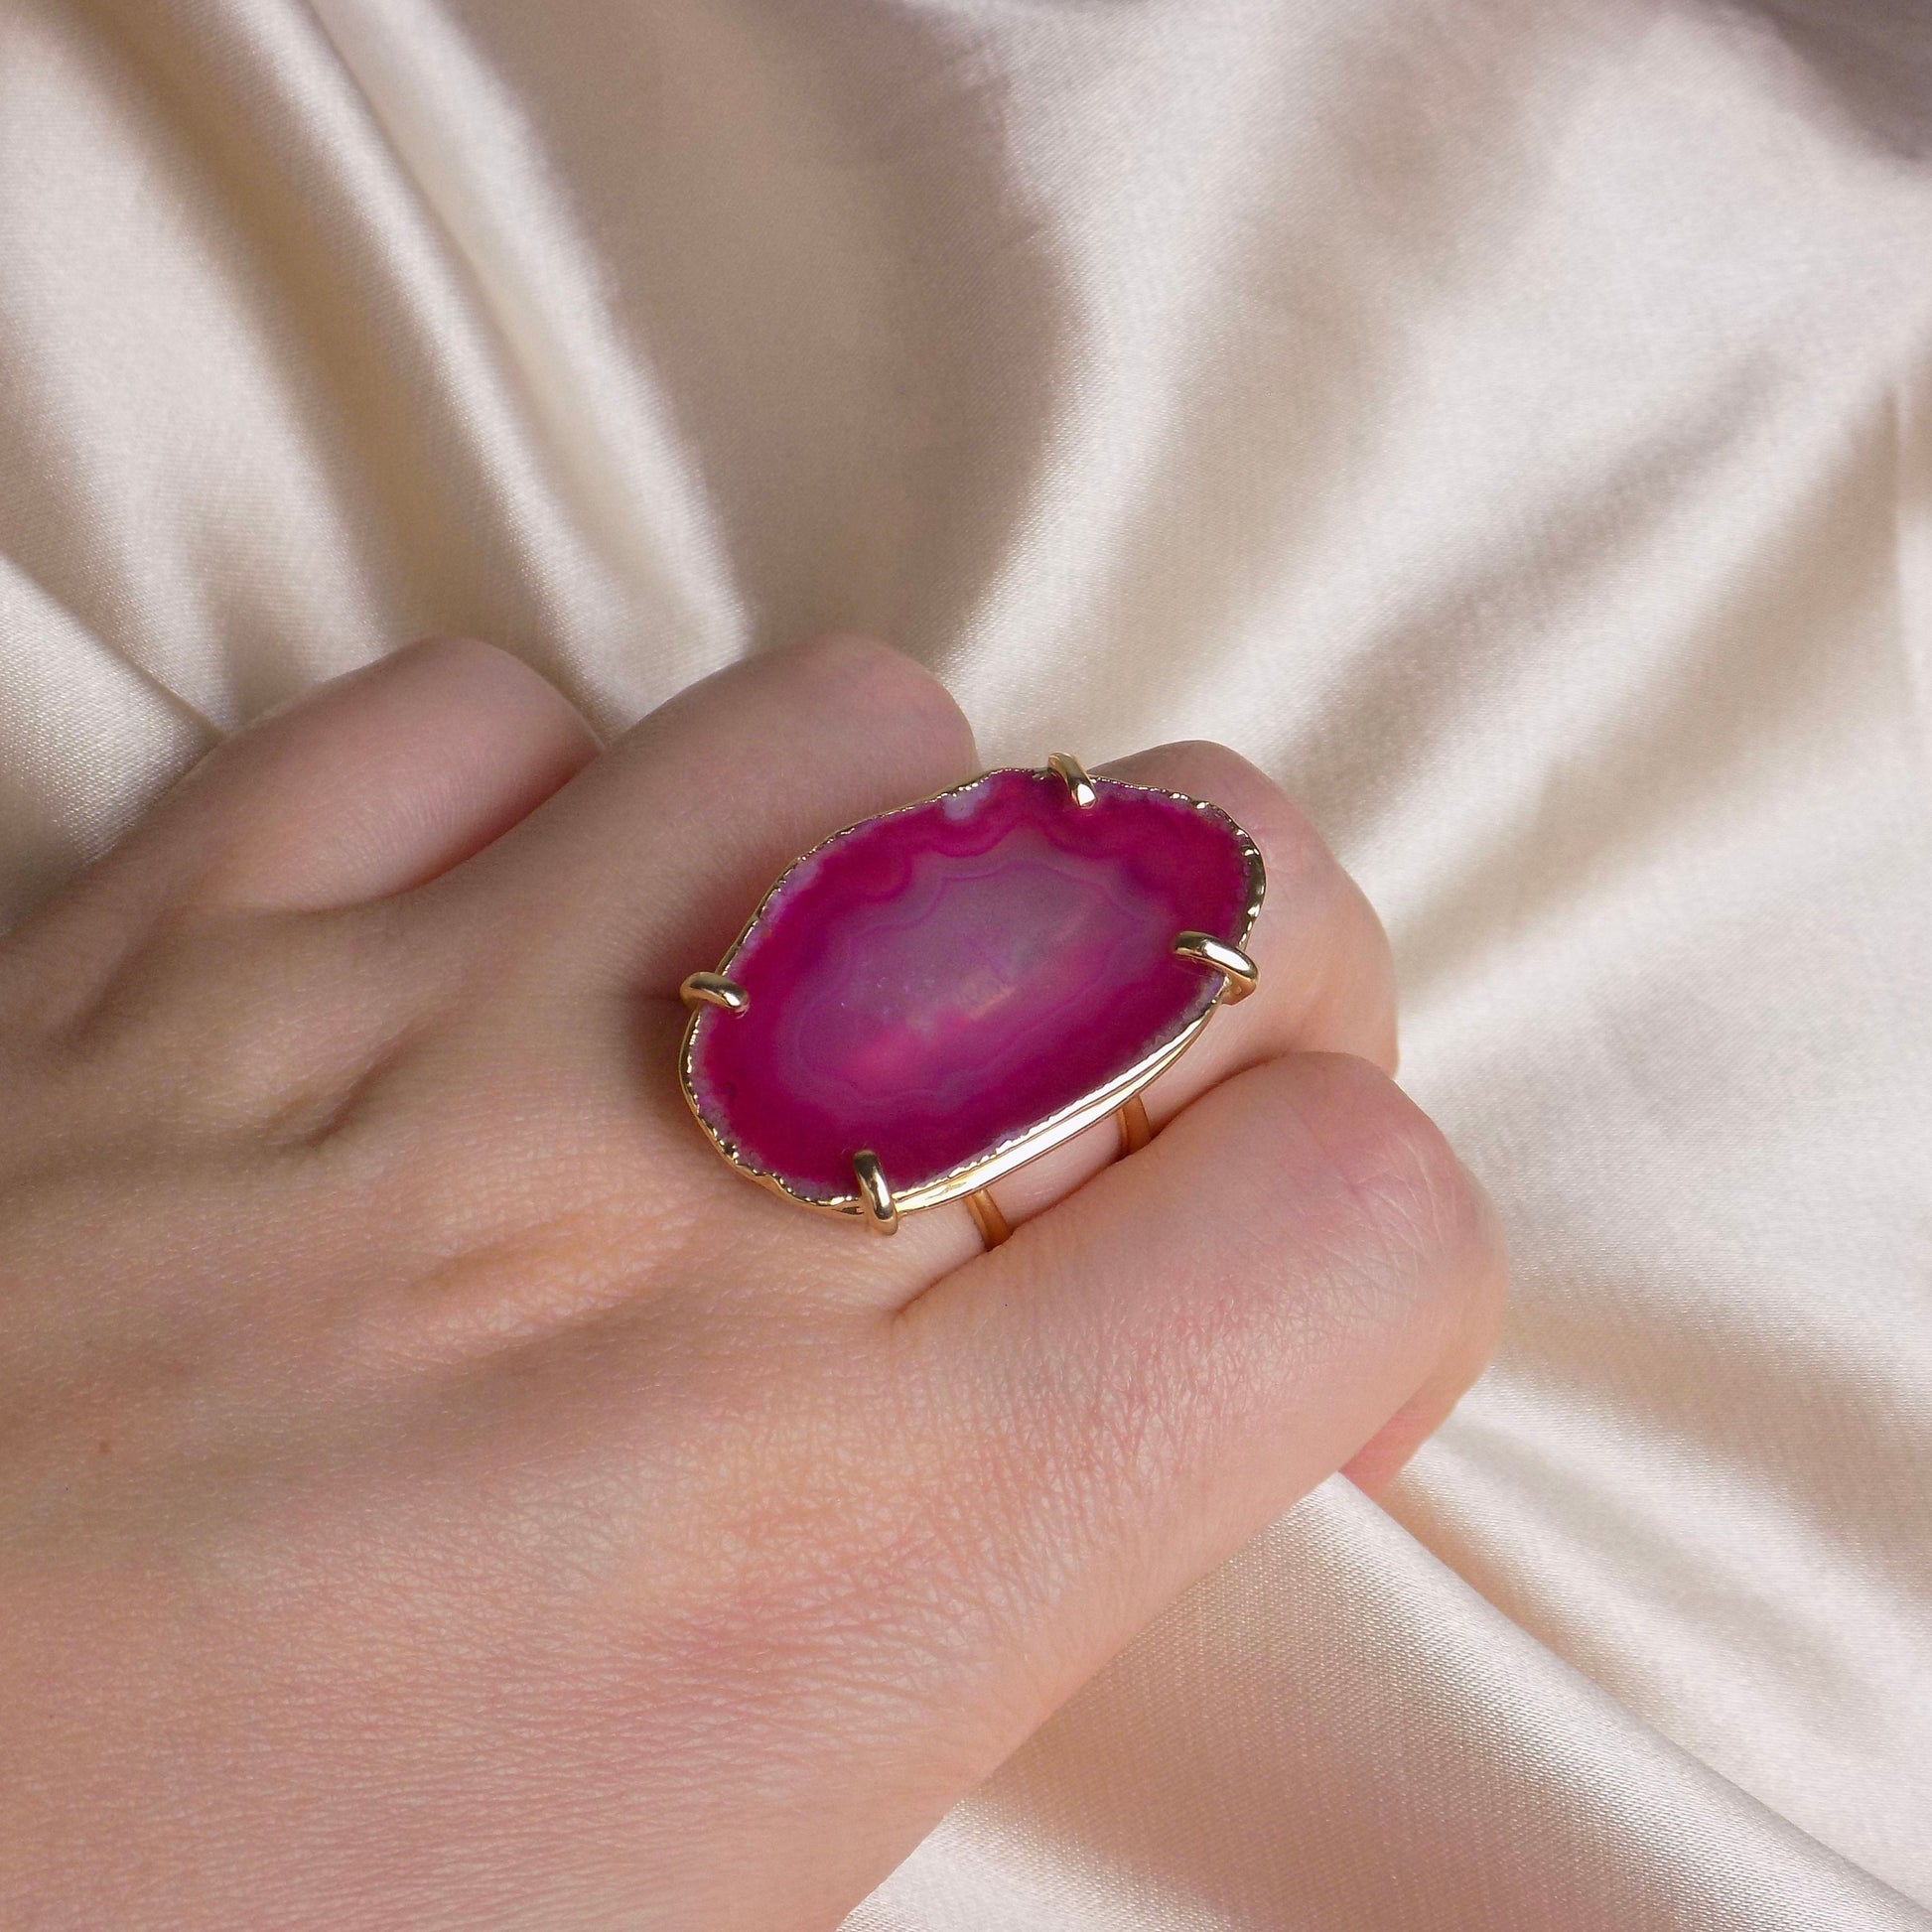 Pink Agate Statement Ring Gold Plated Adjustable, Geode Slice Ring, Gifts For Her, G15-82